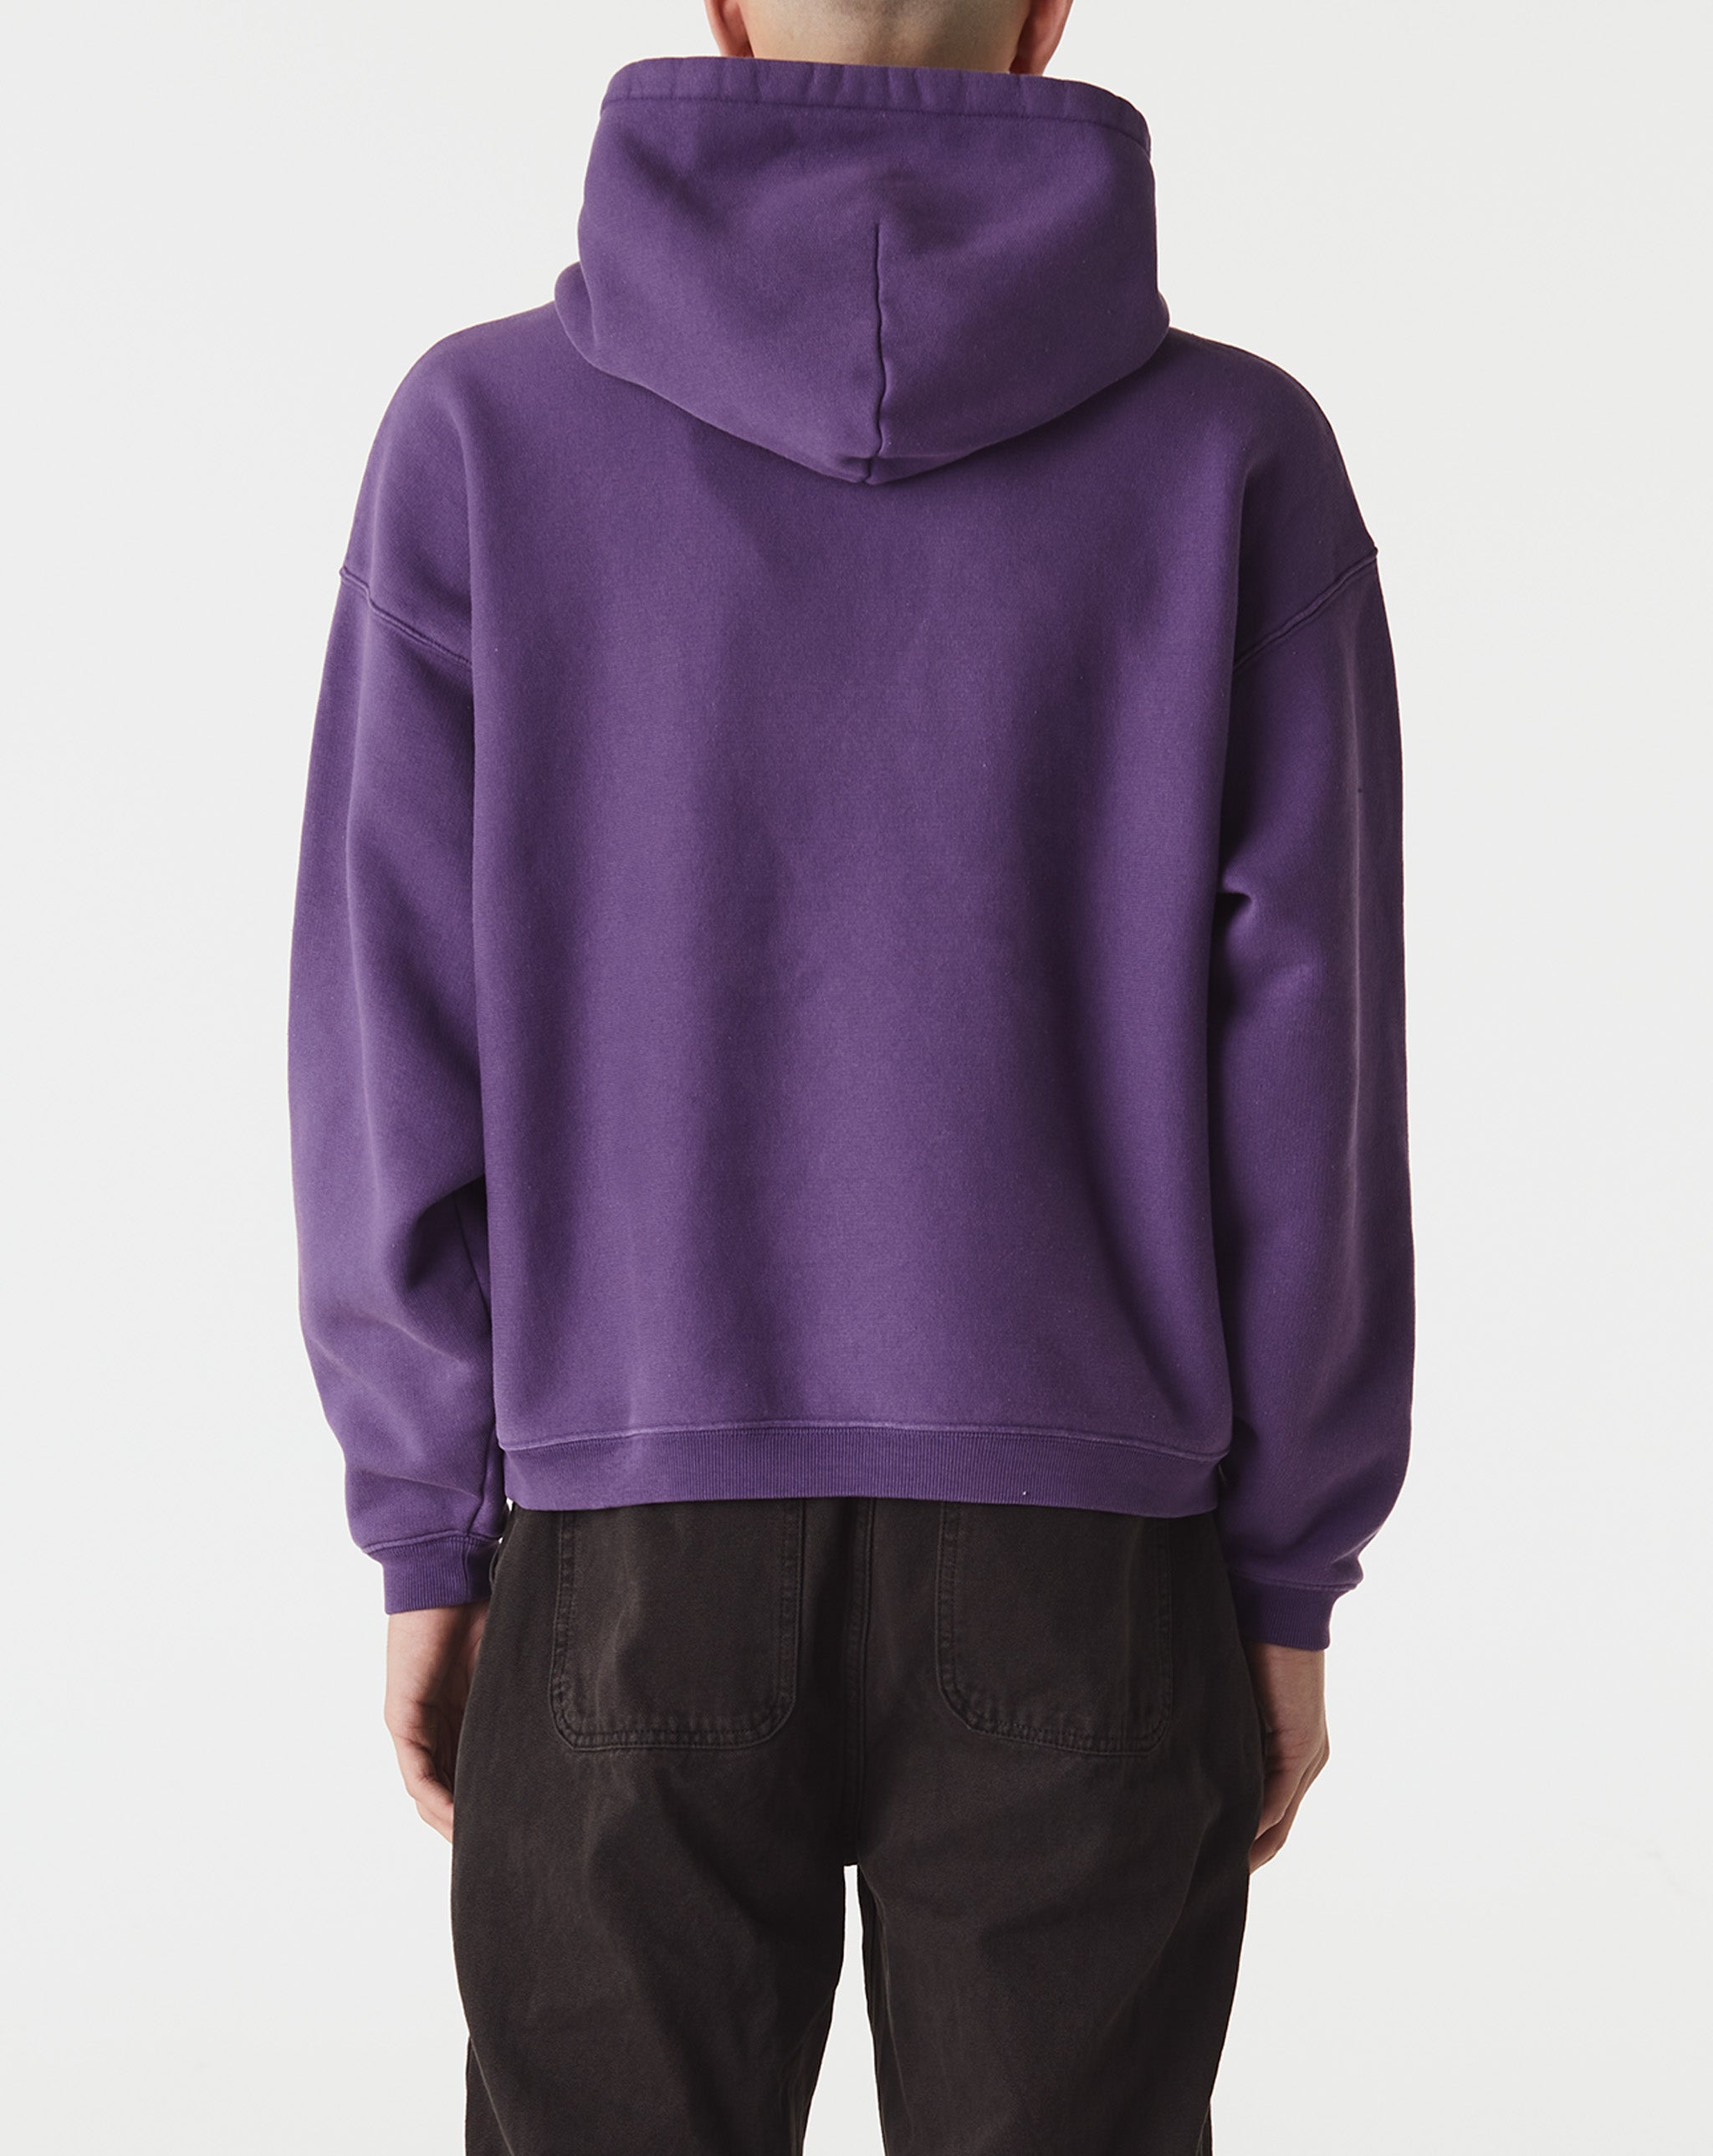 Stüssy Embroidered Relaxed Hoodie  - XHIBITION